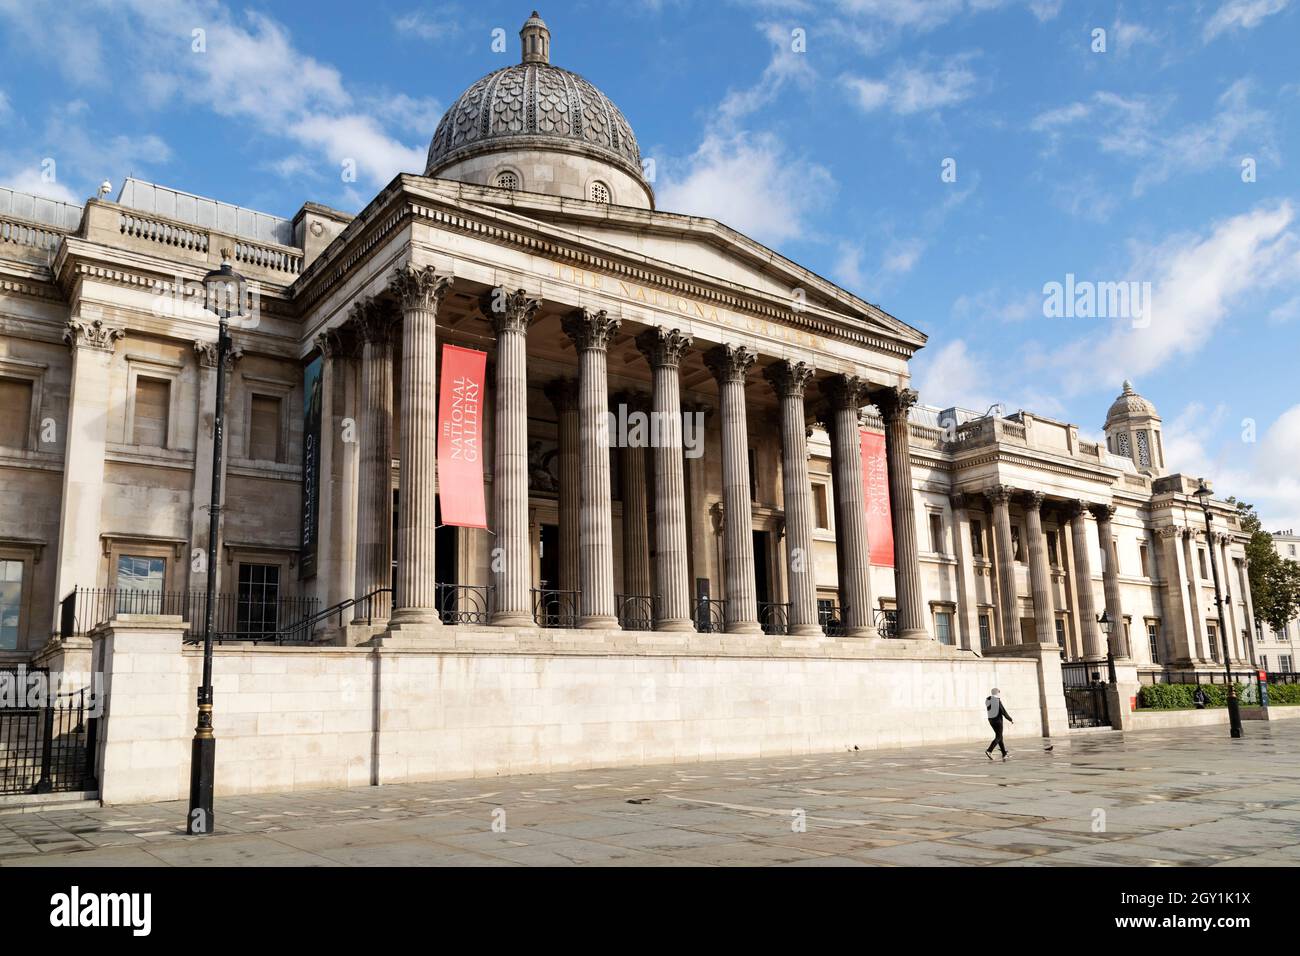 The National Gallery at Trafalgar Square in London, England. The Neoclassical building was designed by William Wilkins. Stock Photo